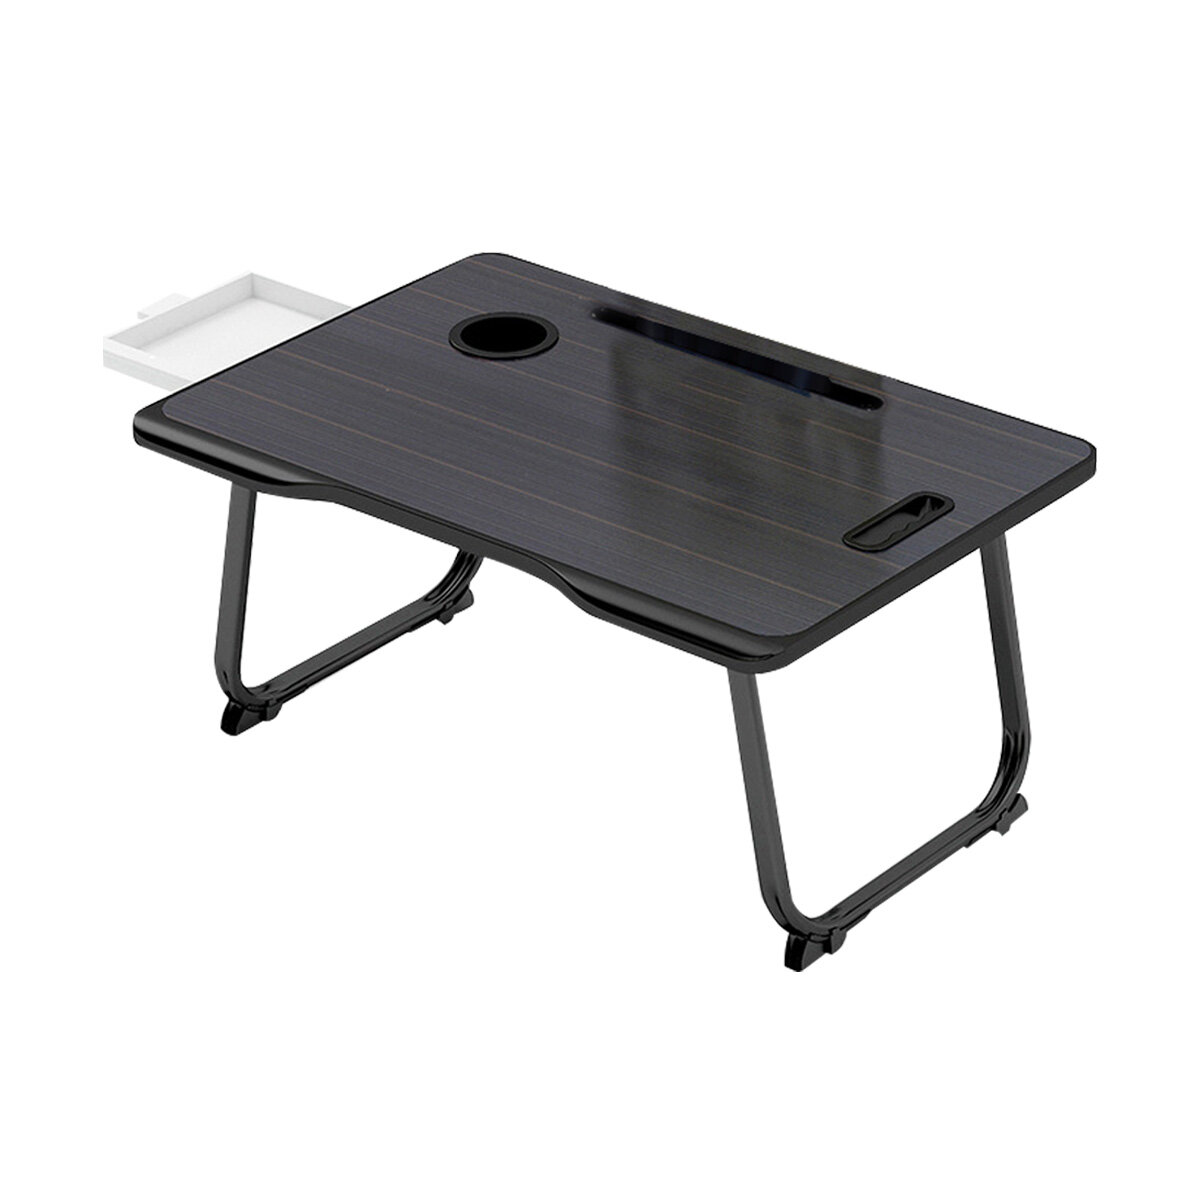 Image of Folding Laptop Table Desk Notebook Learning Writing Desk with Small Drawer Cup Slot Lap Desk Bed for Children Student Ho